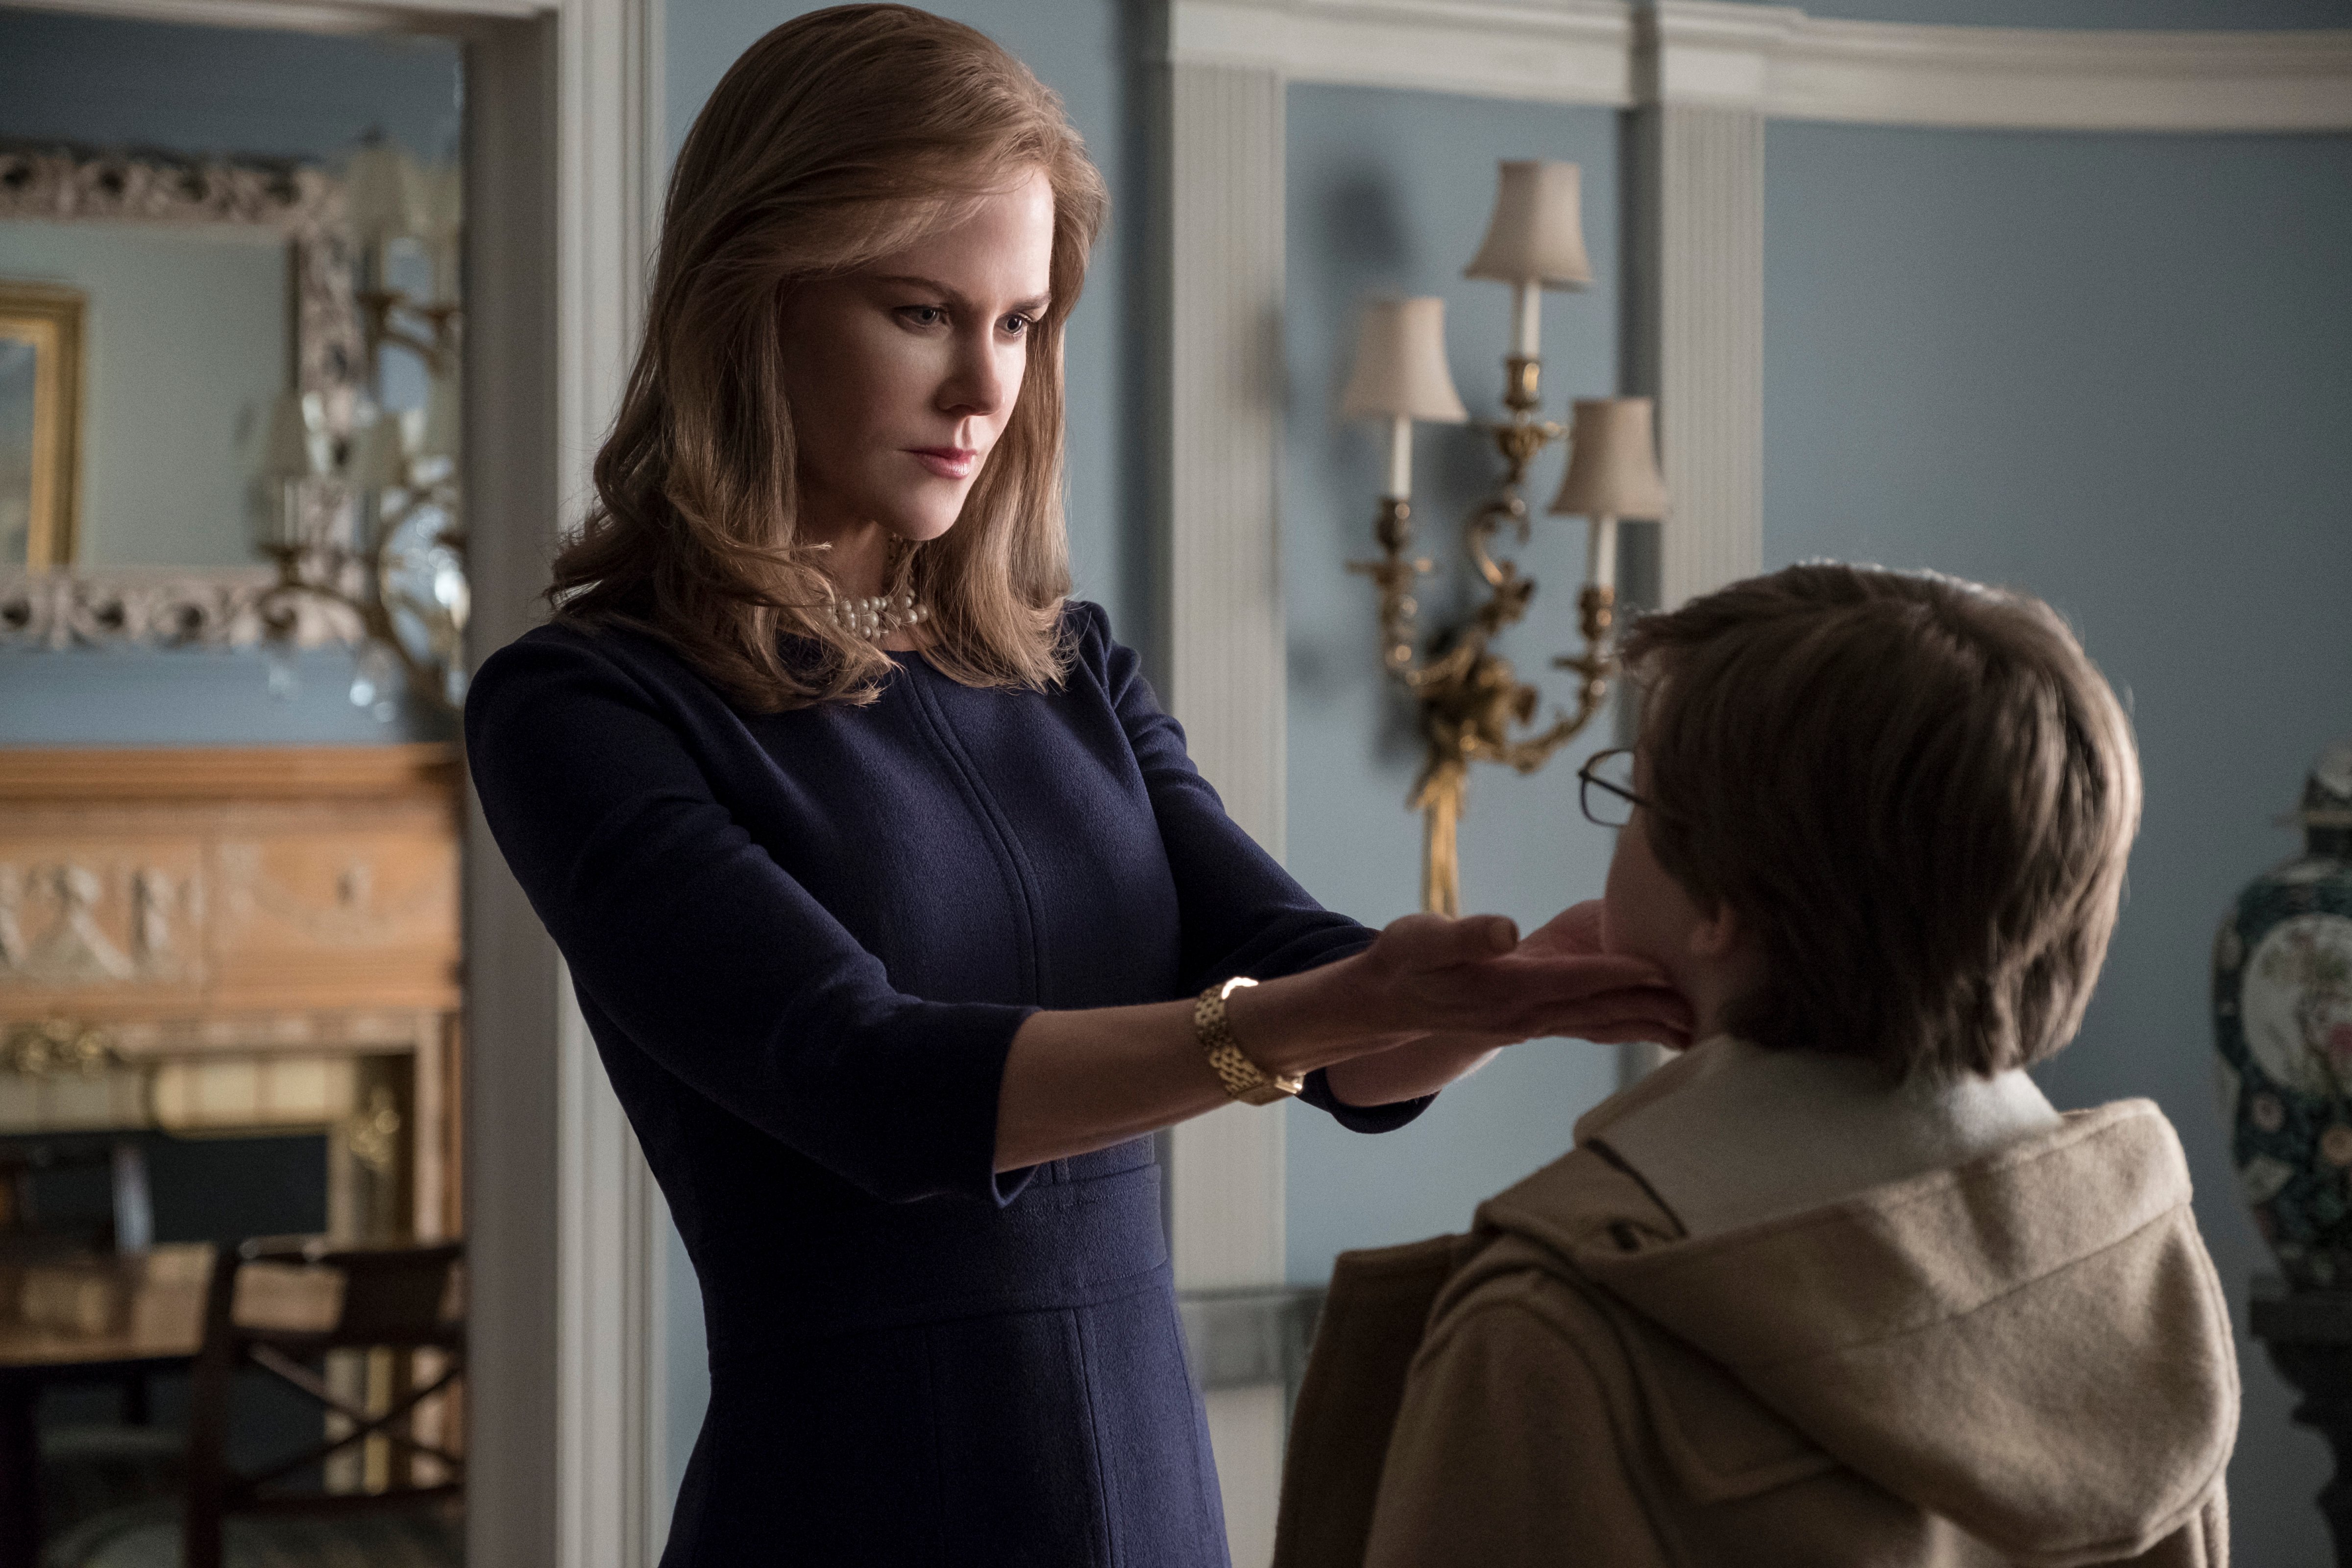 Nicole Kidman and Oakes Fegley in 'The Goldfinch' (Courtesy Warner Bros. Pictures)